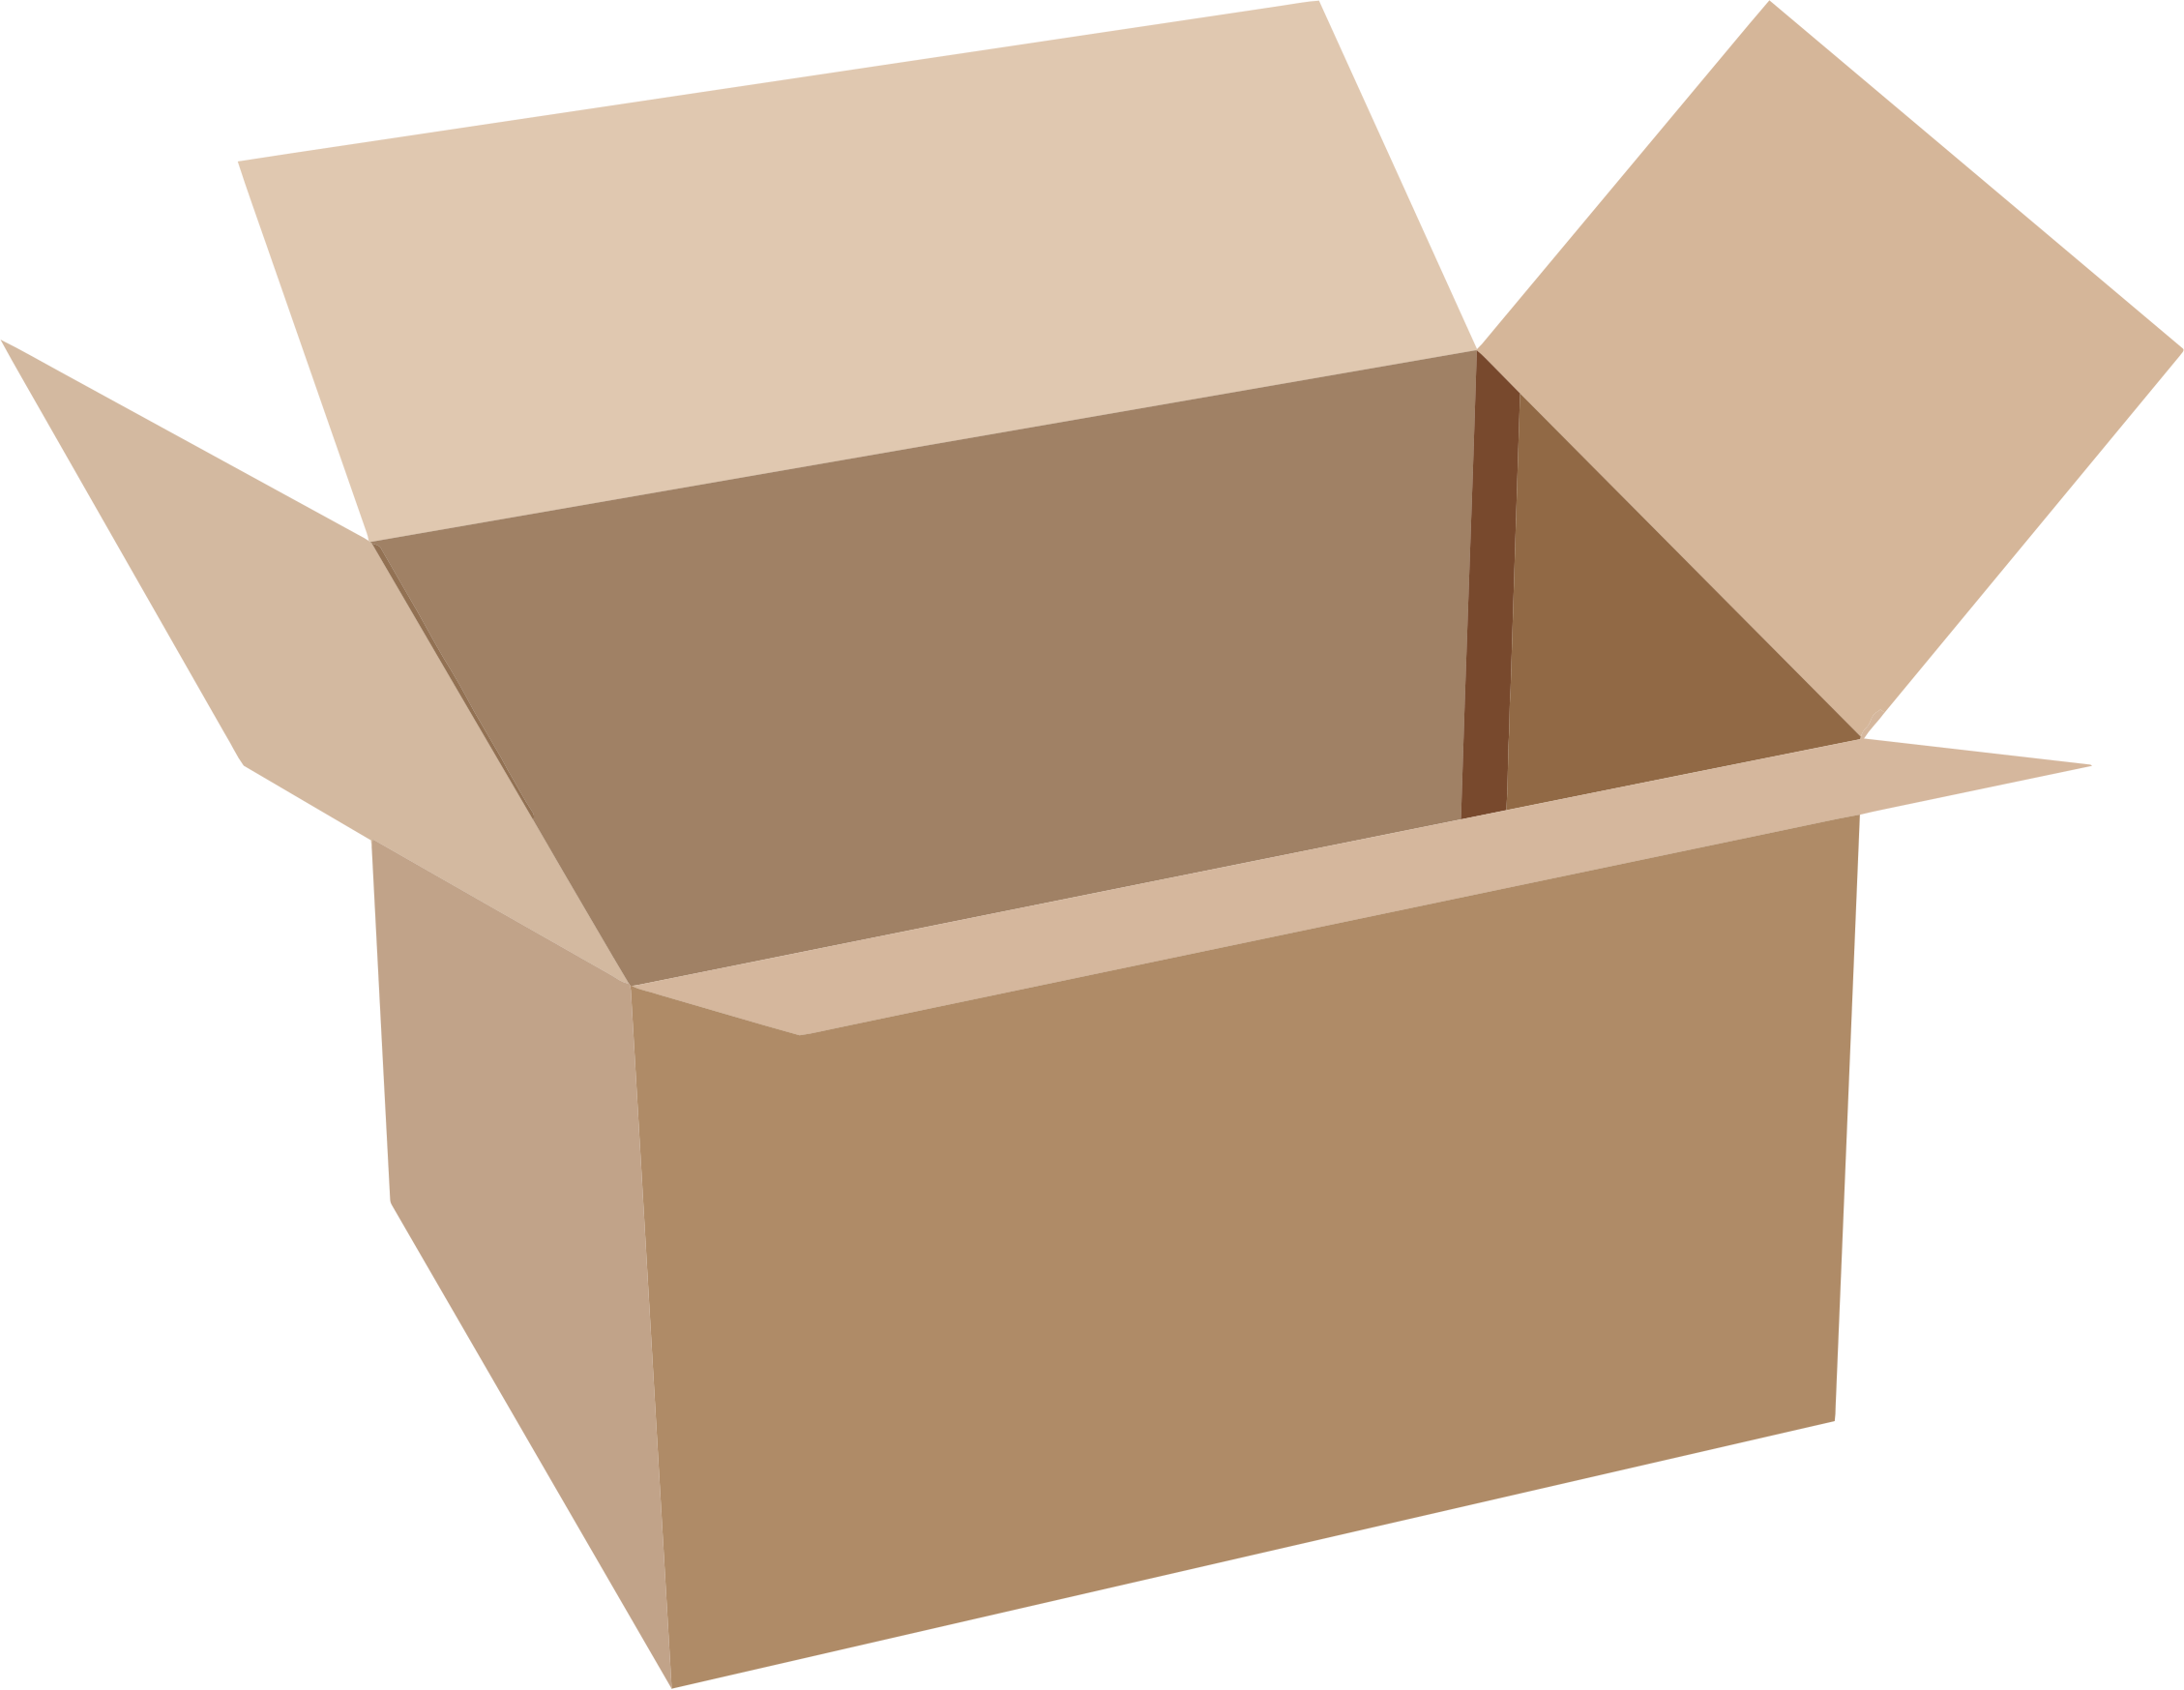 Download Box PNG, Package Box Carton, Square Box Clipart - Free Transparent...